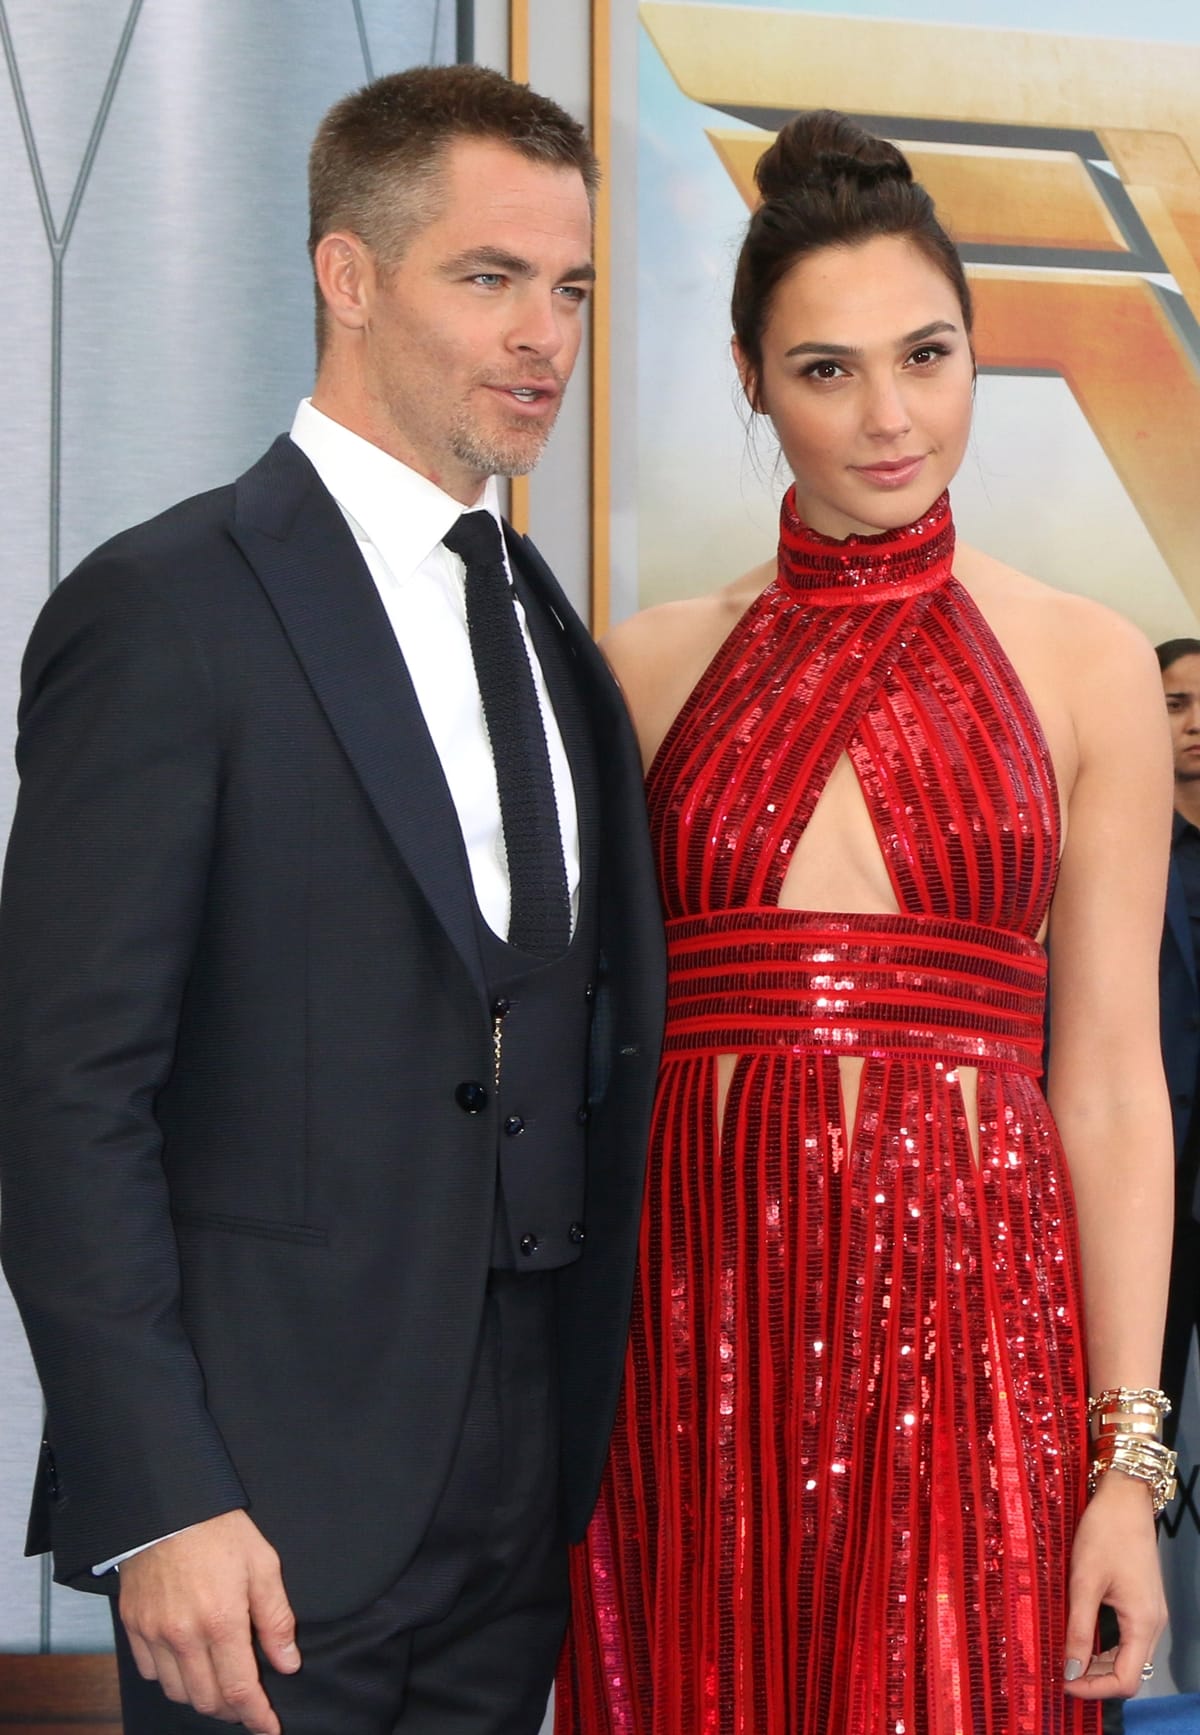 Gal Gadot stands at 5ft 9 ¼ (175.9 cm), while Chris Pine is taller by approximately 9 inches at 6ft ½ in (184.2 cm)